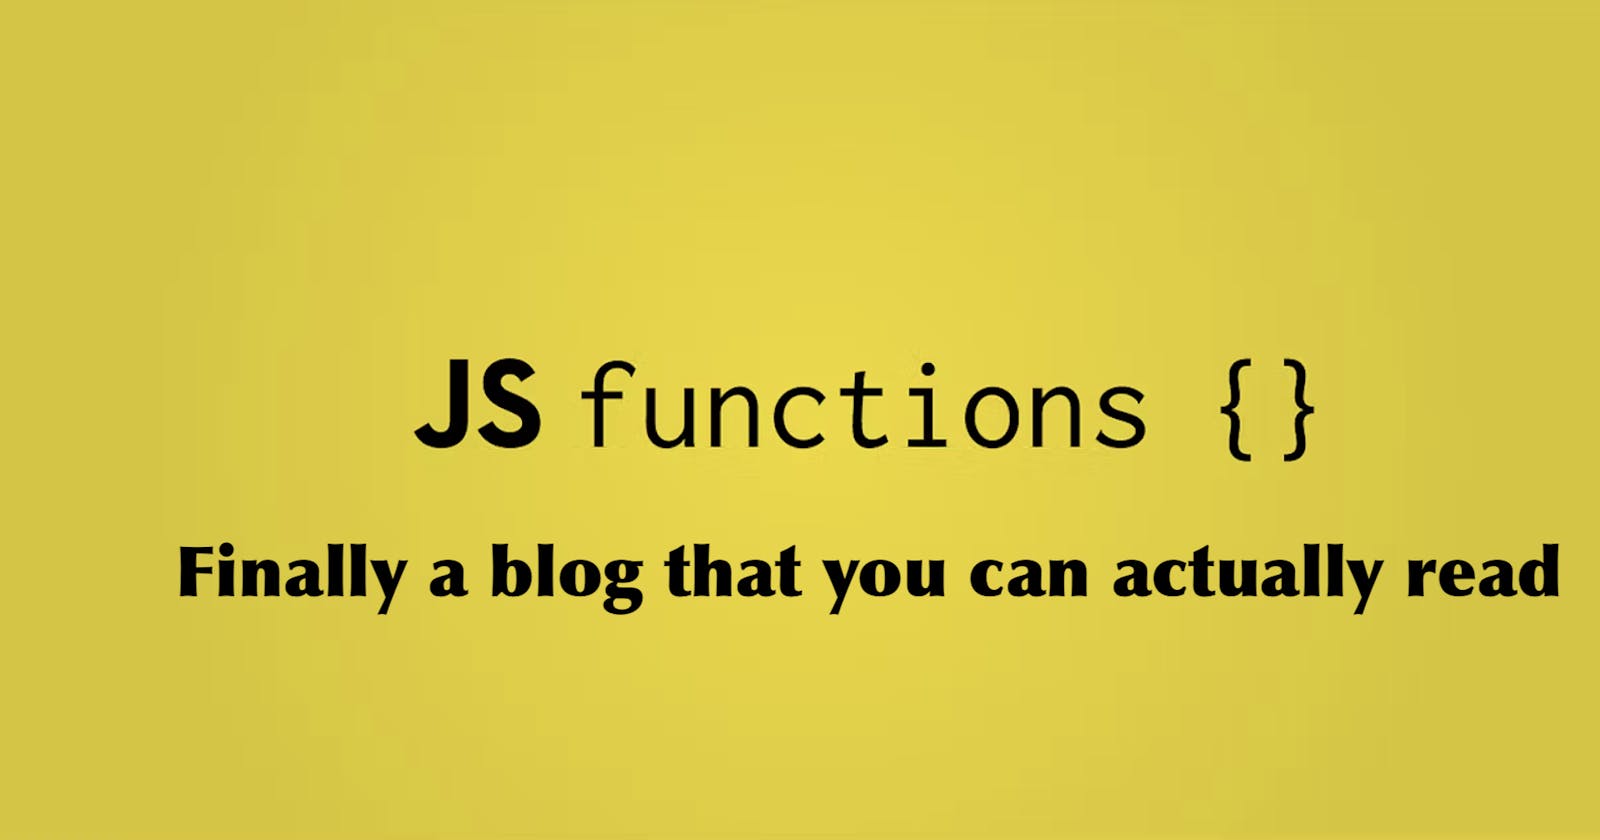 who, what, why, where, when, and how. All about JavaScript Functions.